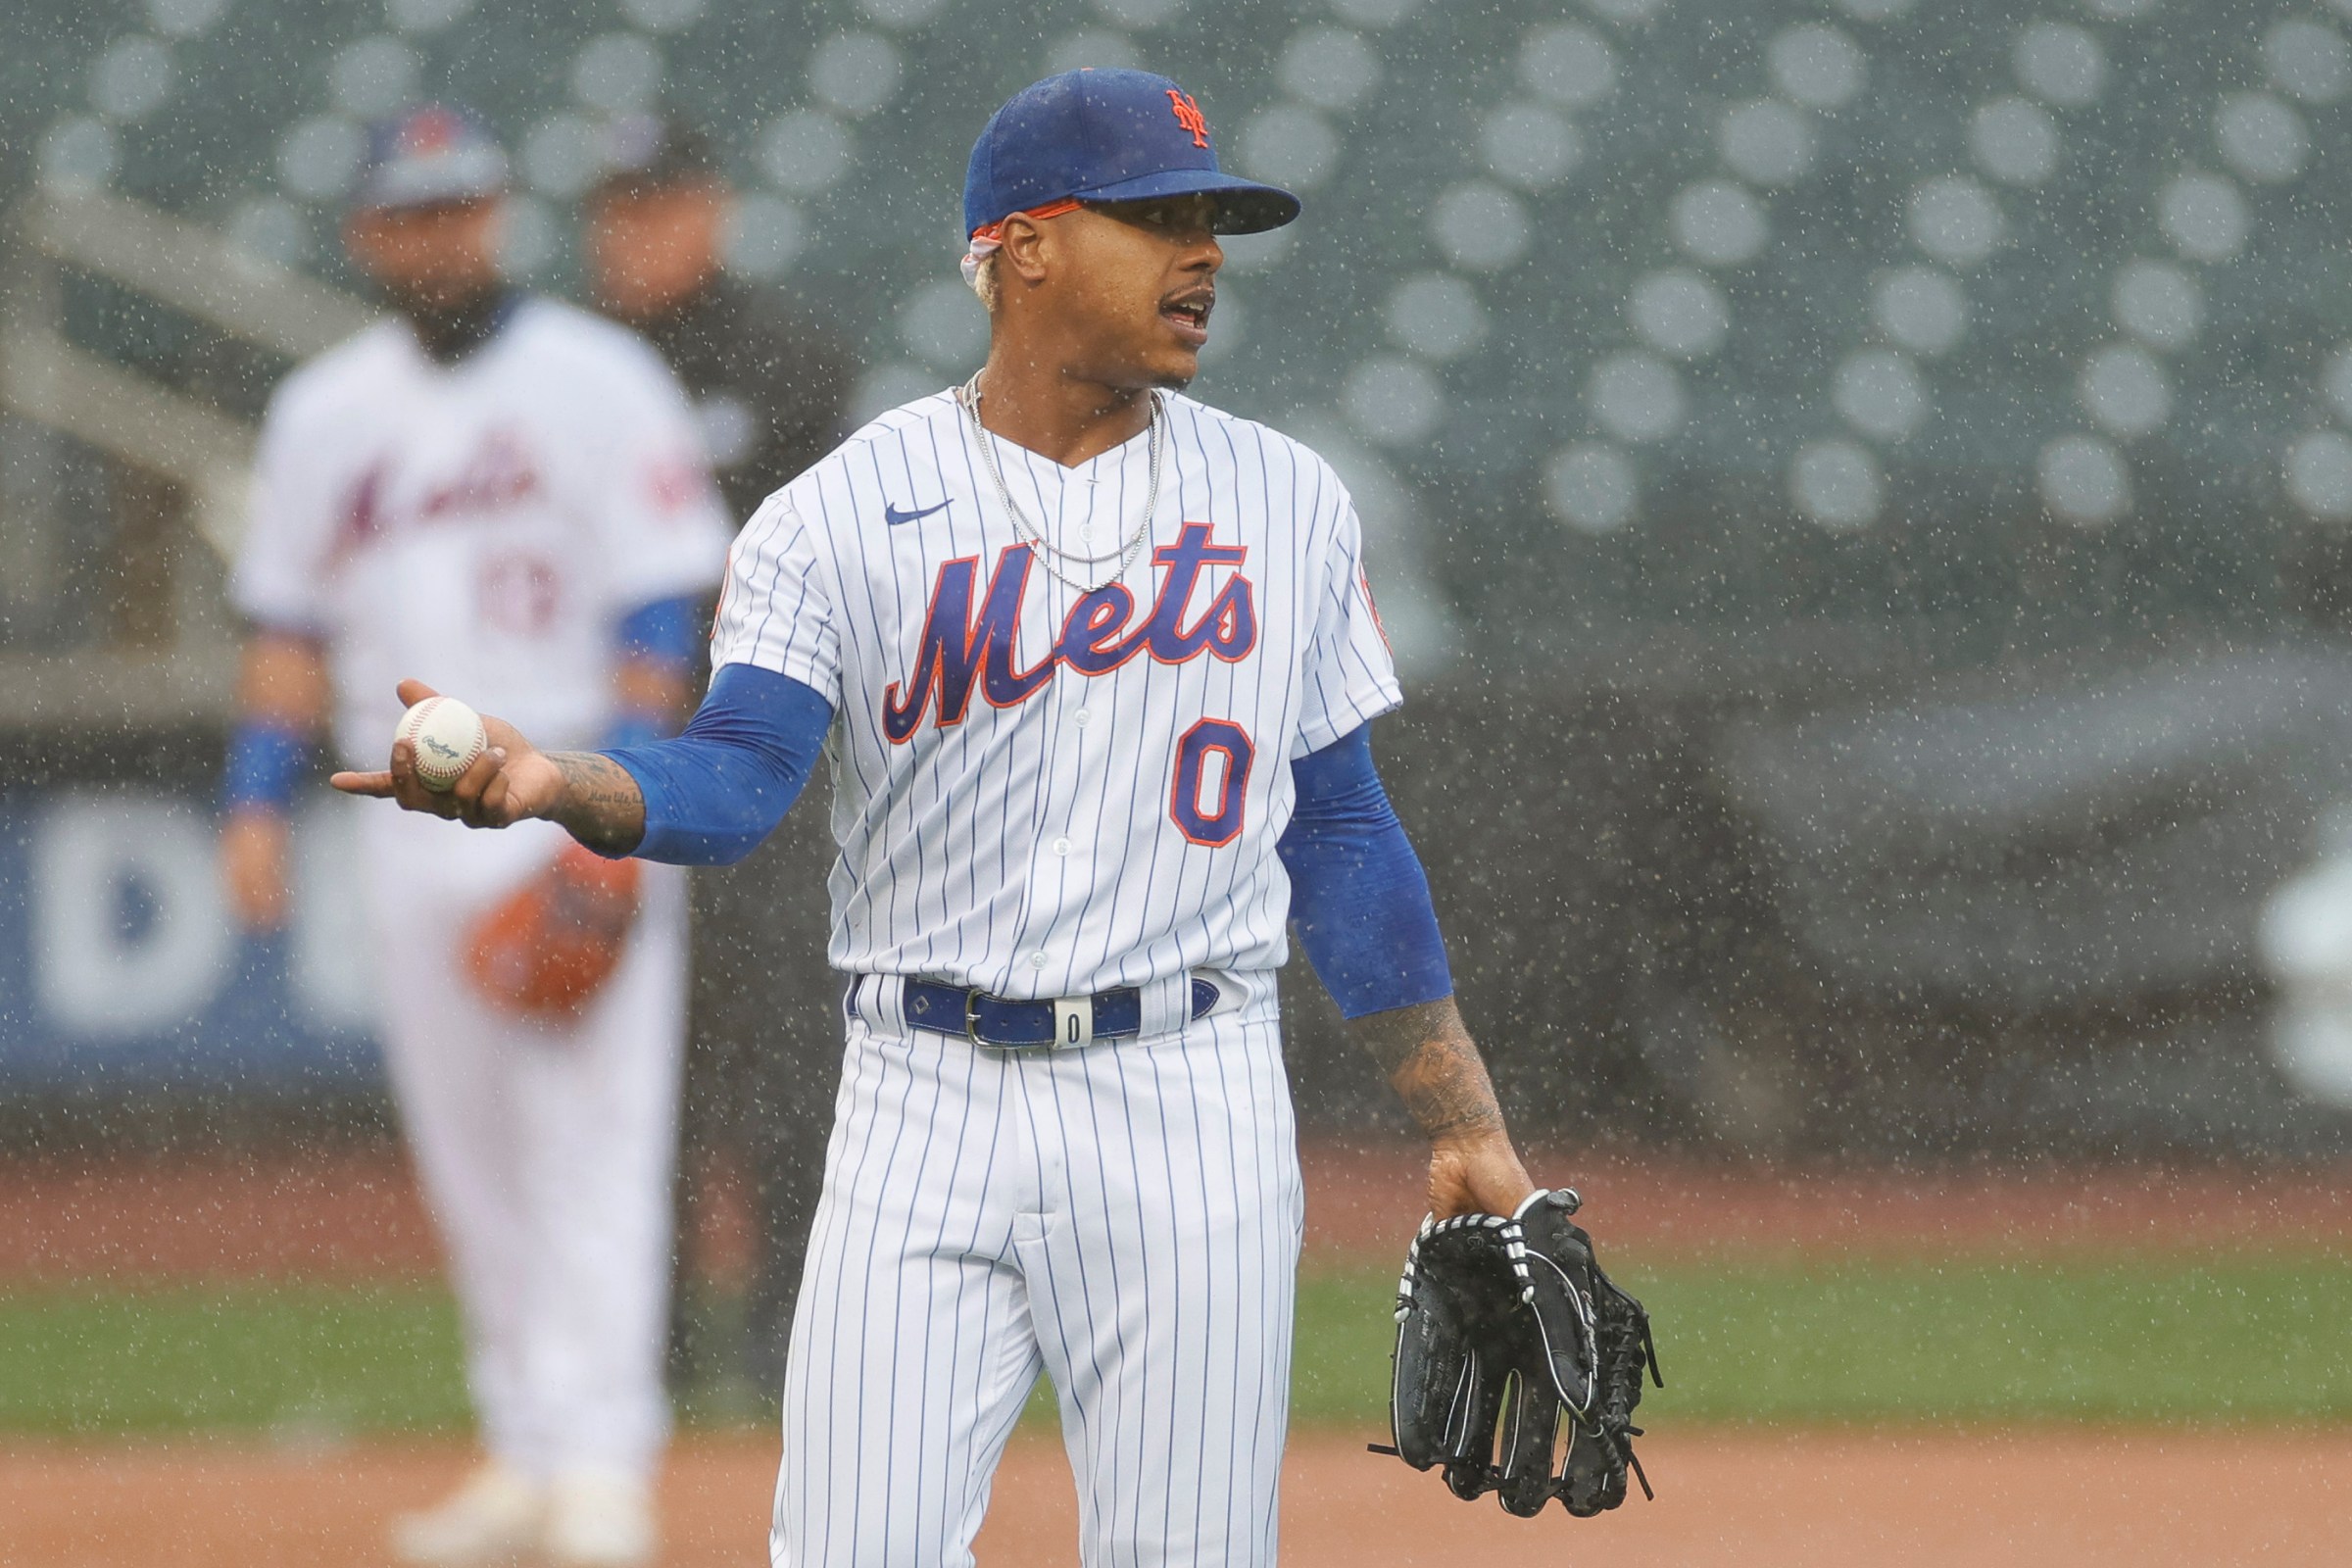 Marcus Stroman of the Mets stands on the mound while it rains.